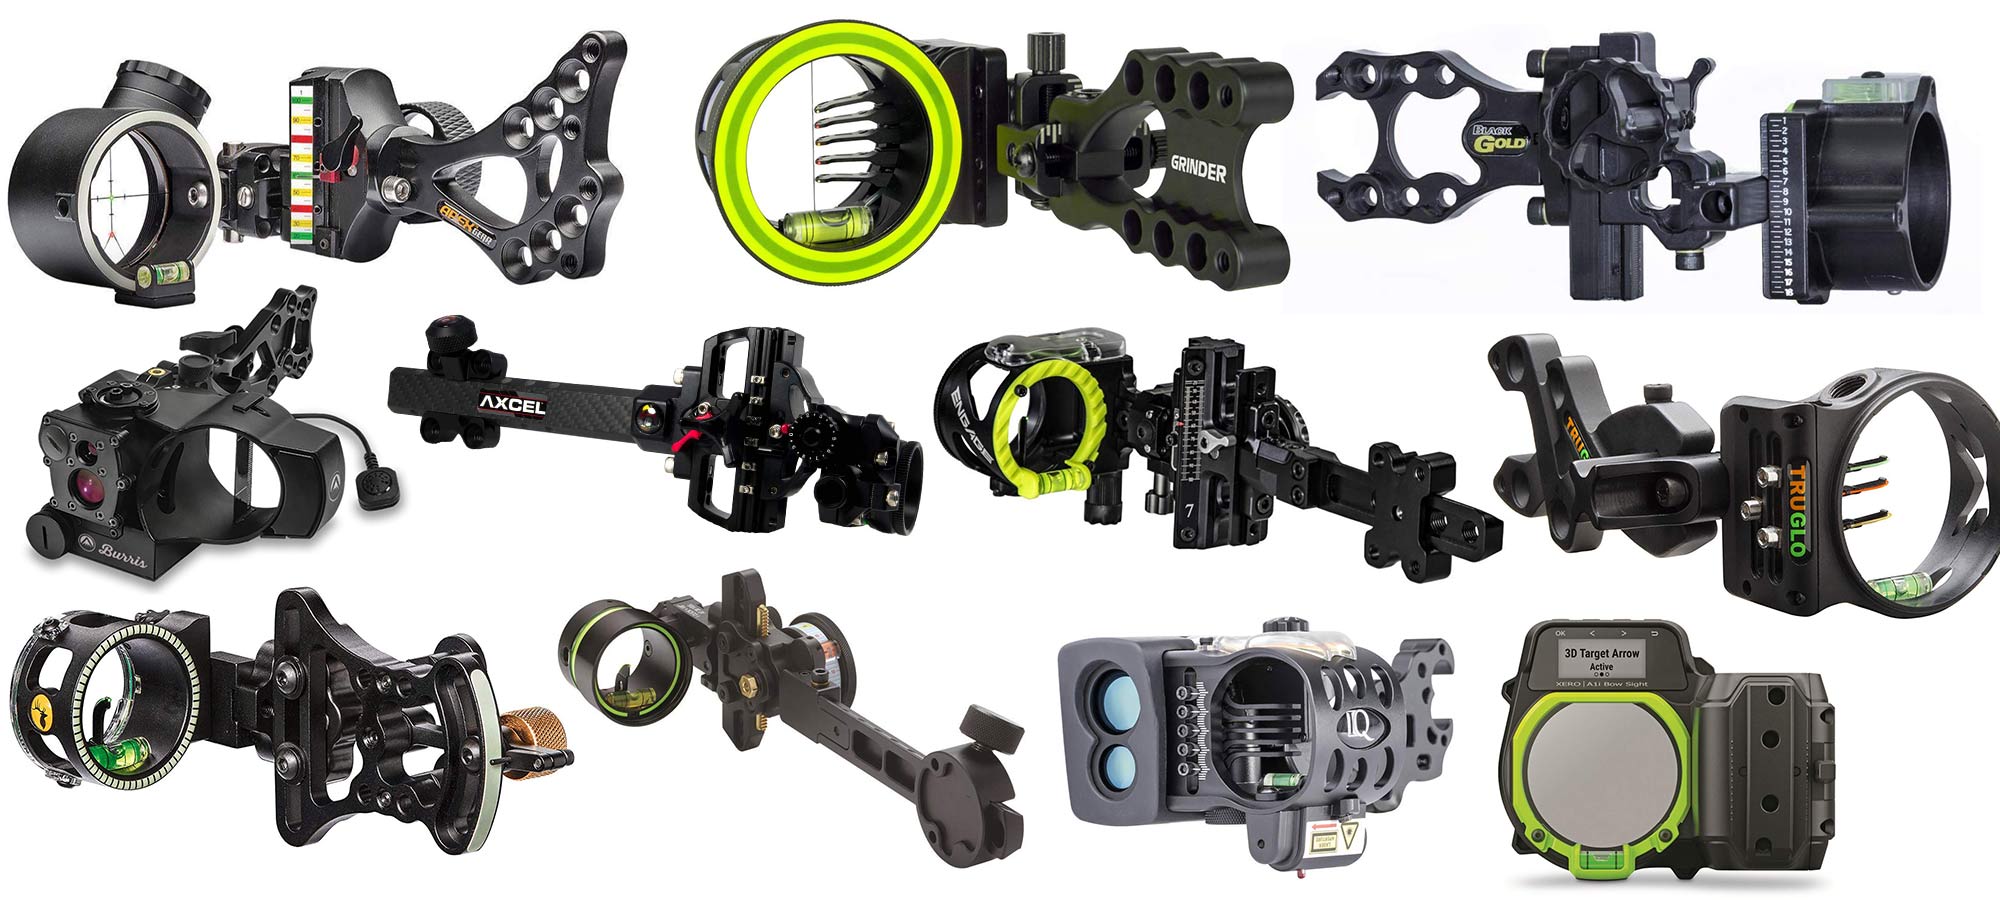 11 Hot New Bow Sights for 2019 | Outdoor Life